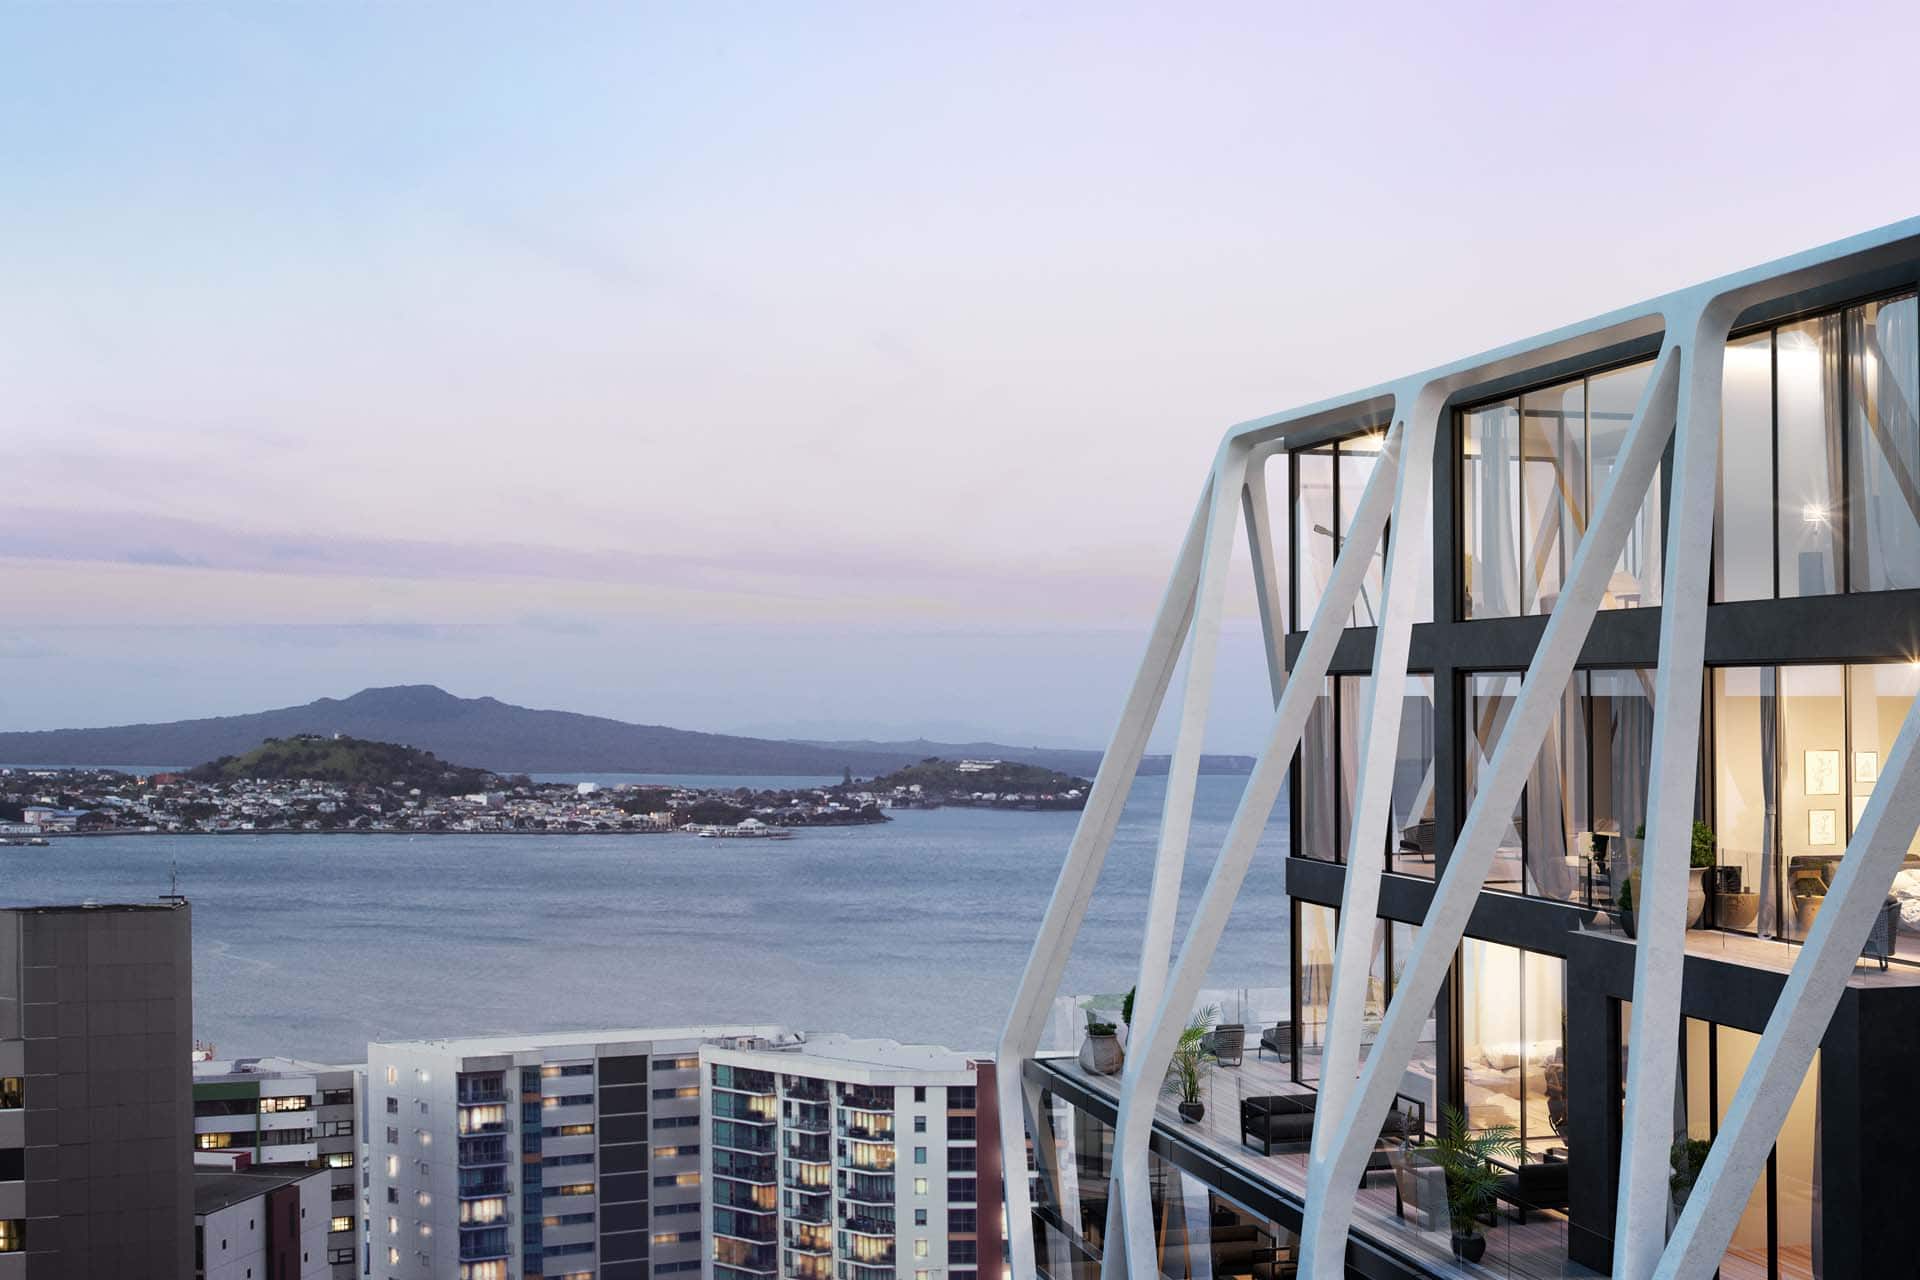 The International will have a dramatic white exoskeleton and views of Rangitoto. 